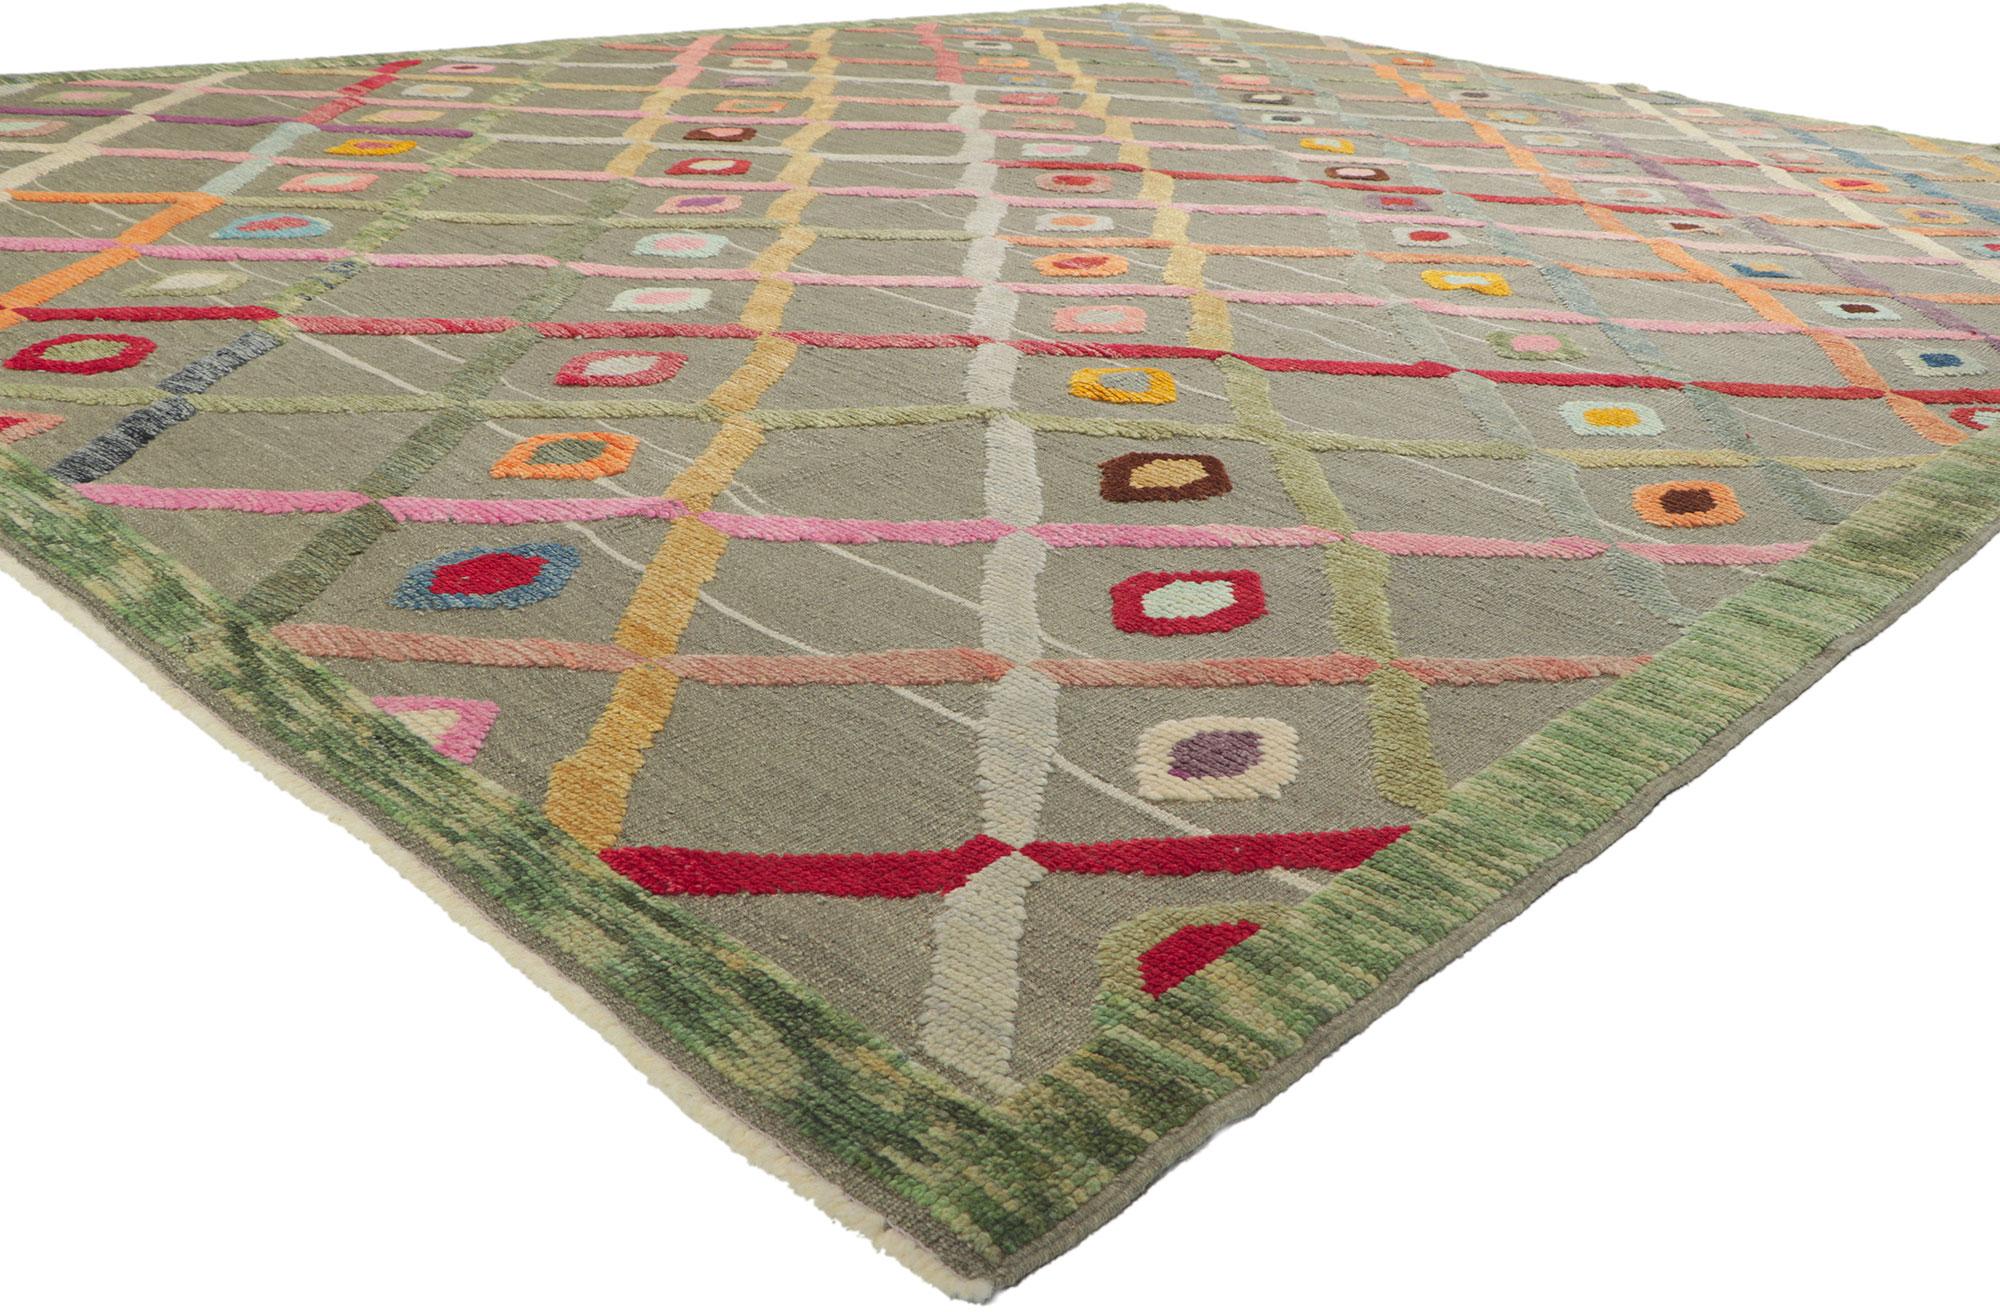 53785 New colorful high-low rug, 10.07 x 13.05.
Showcasing a raised design with incredible detail and texture, this geometric high-low rug is a captivating vision of woven beauty. The raised lattice design and lively colorway woven into this piece